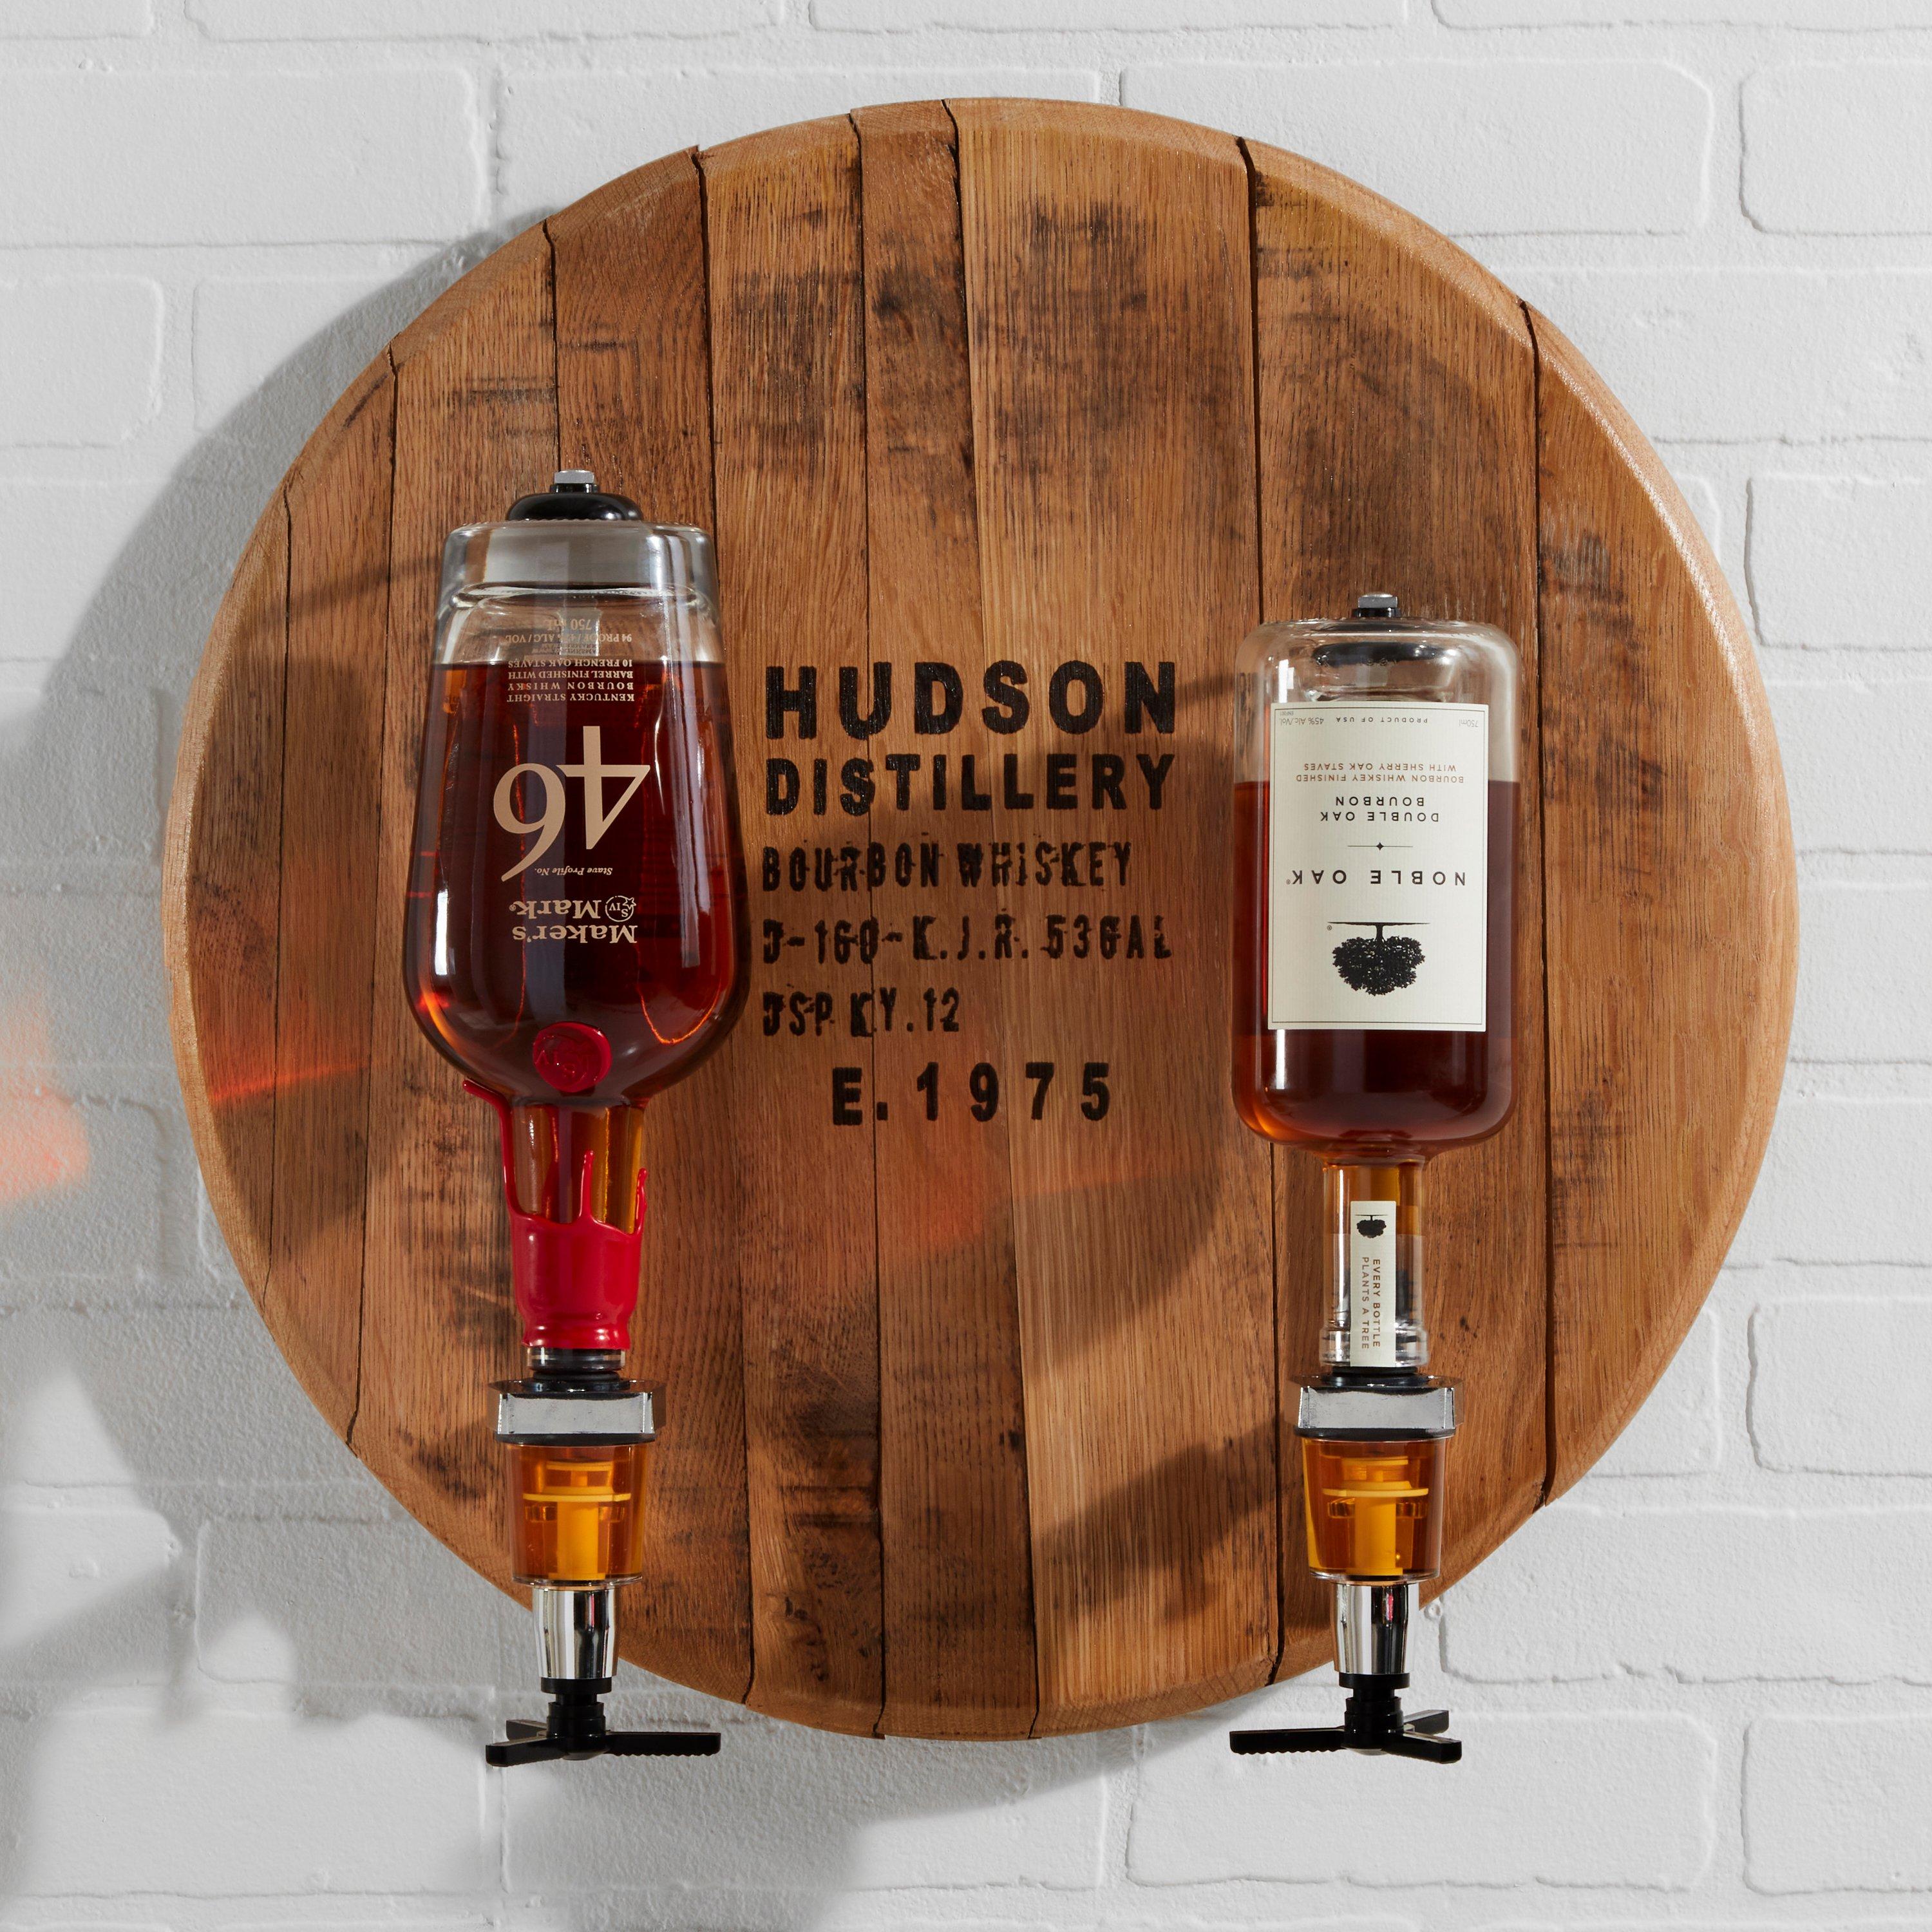 Luxury Liquor Dispensers: The WineStation Preserves and Dispenses Fine Wine  With Style